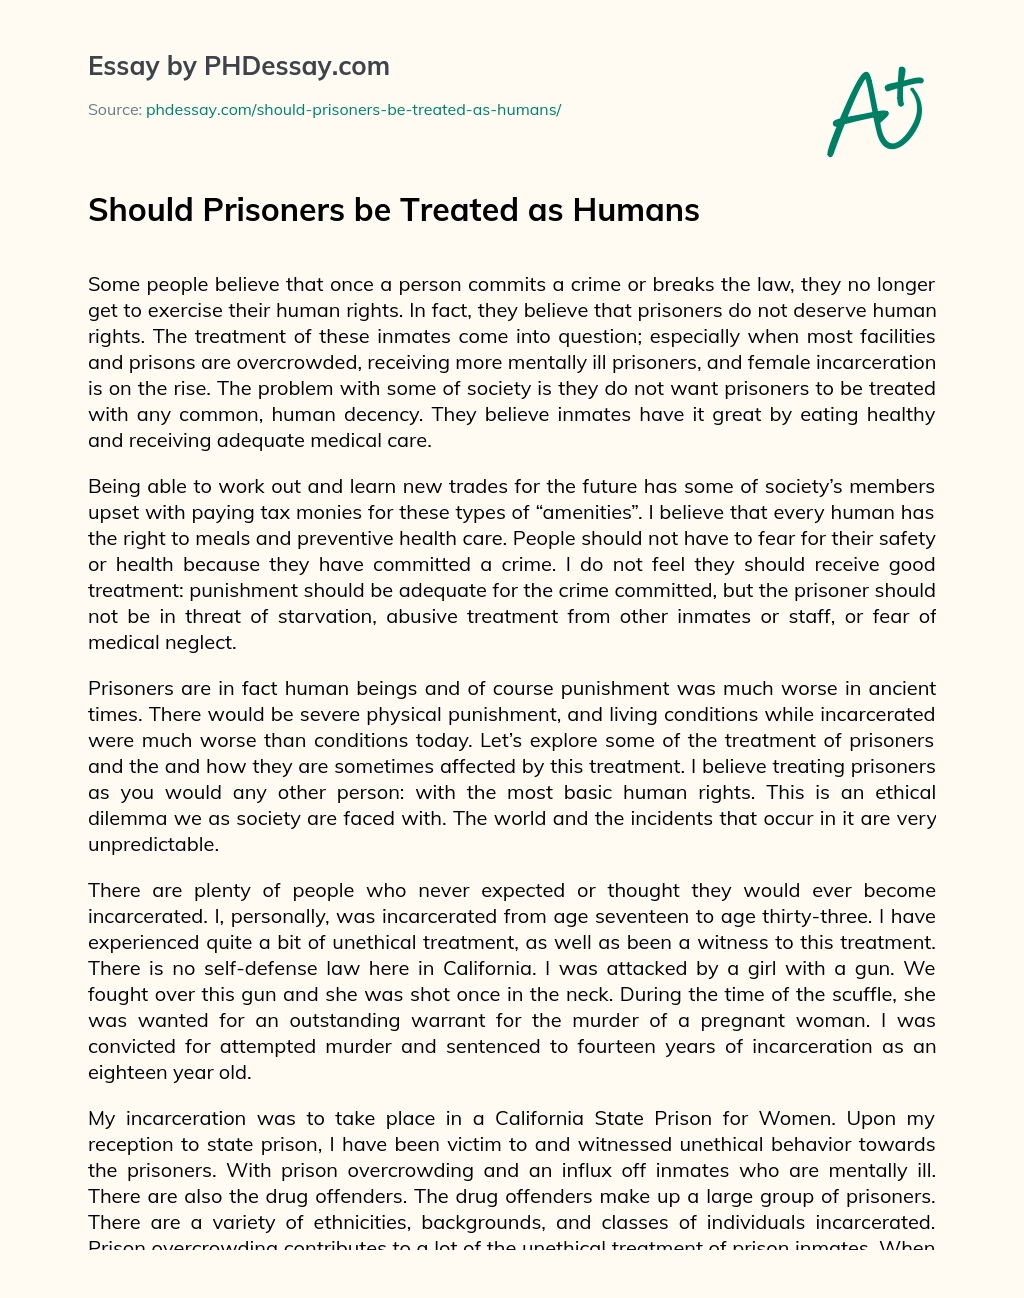 Should Prisoners be Treated as Humans essay